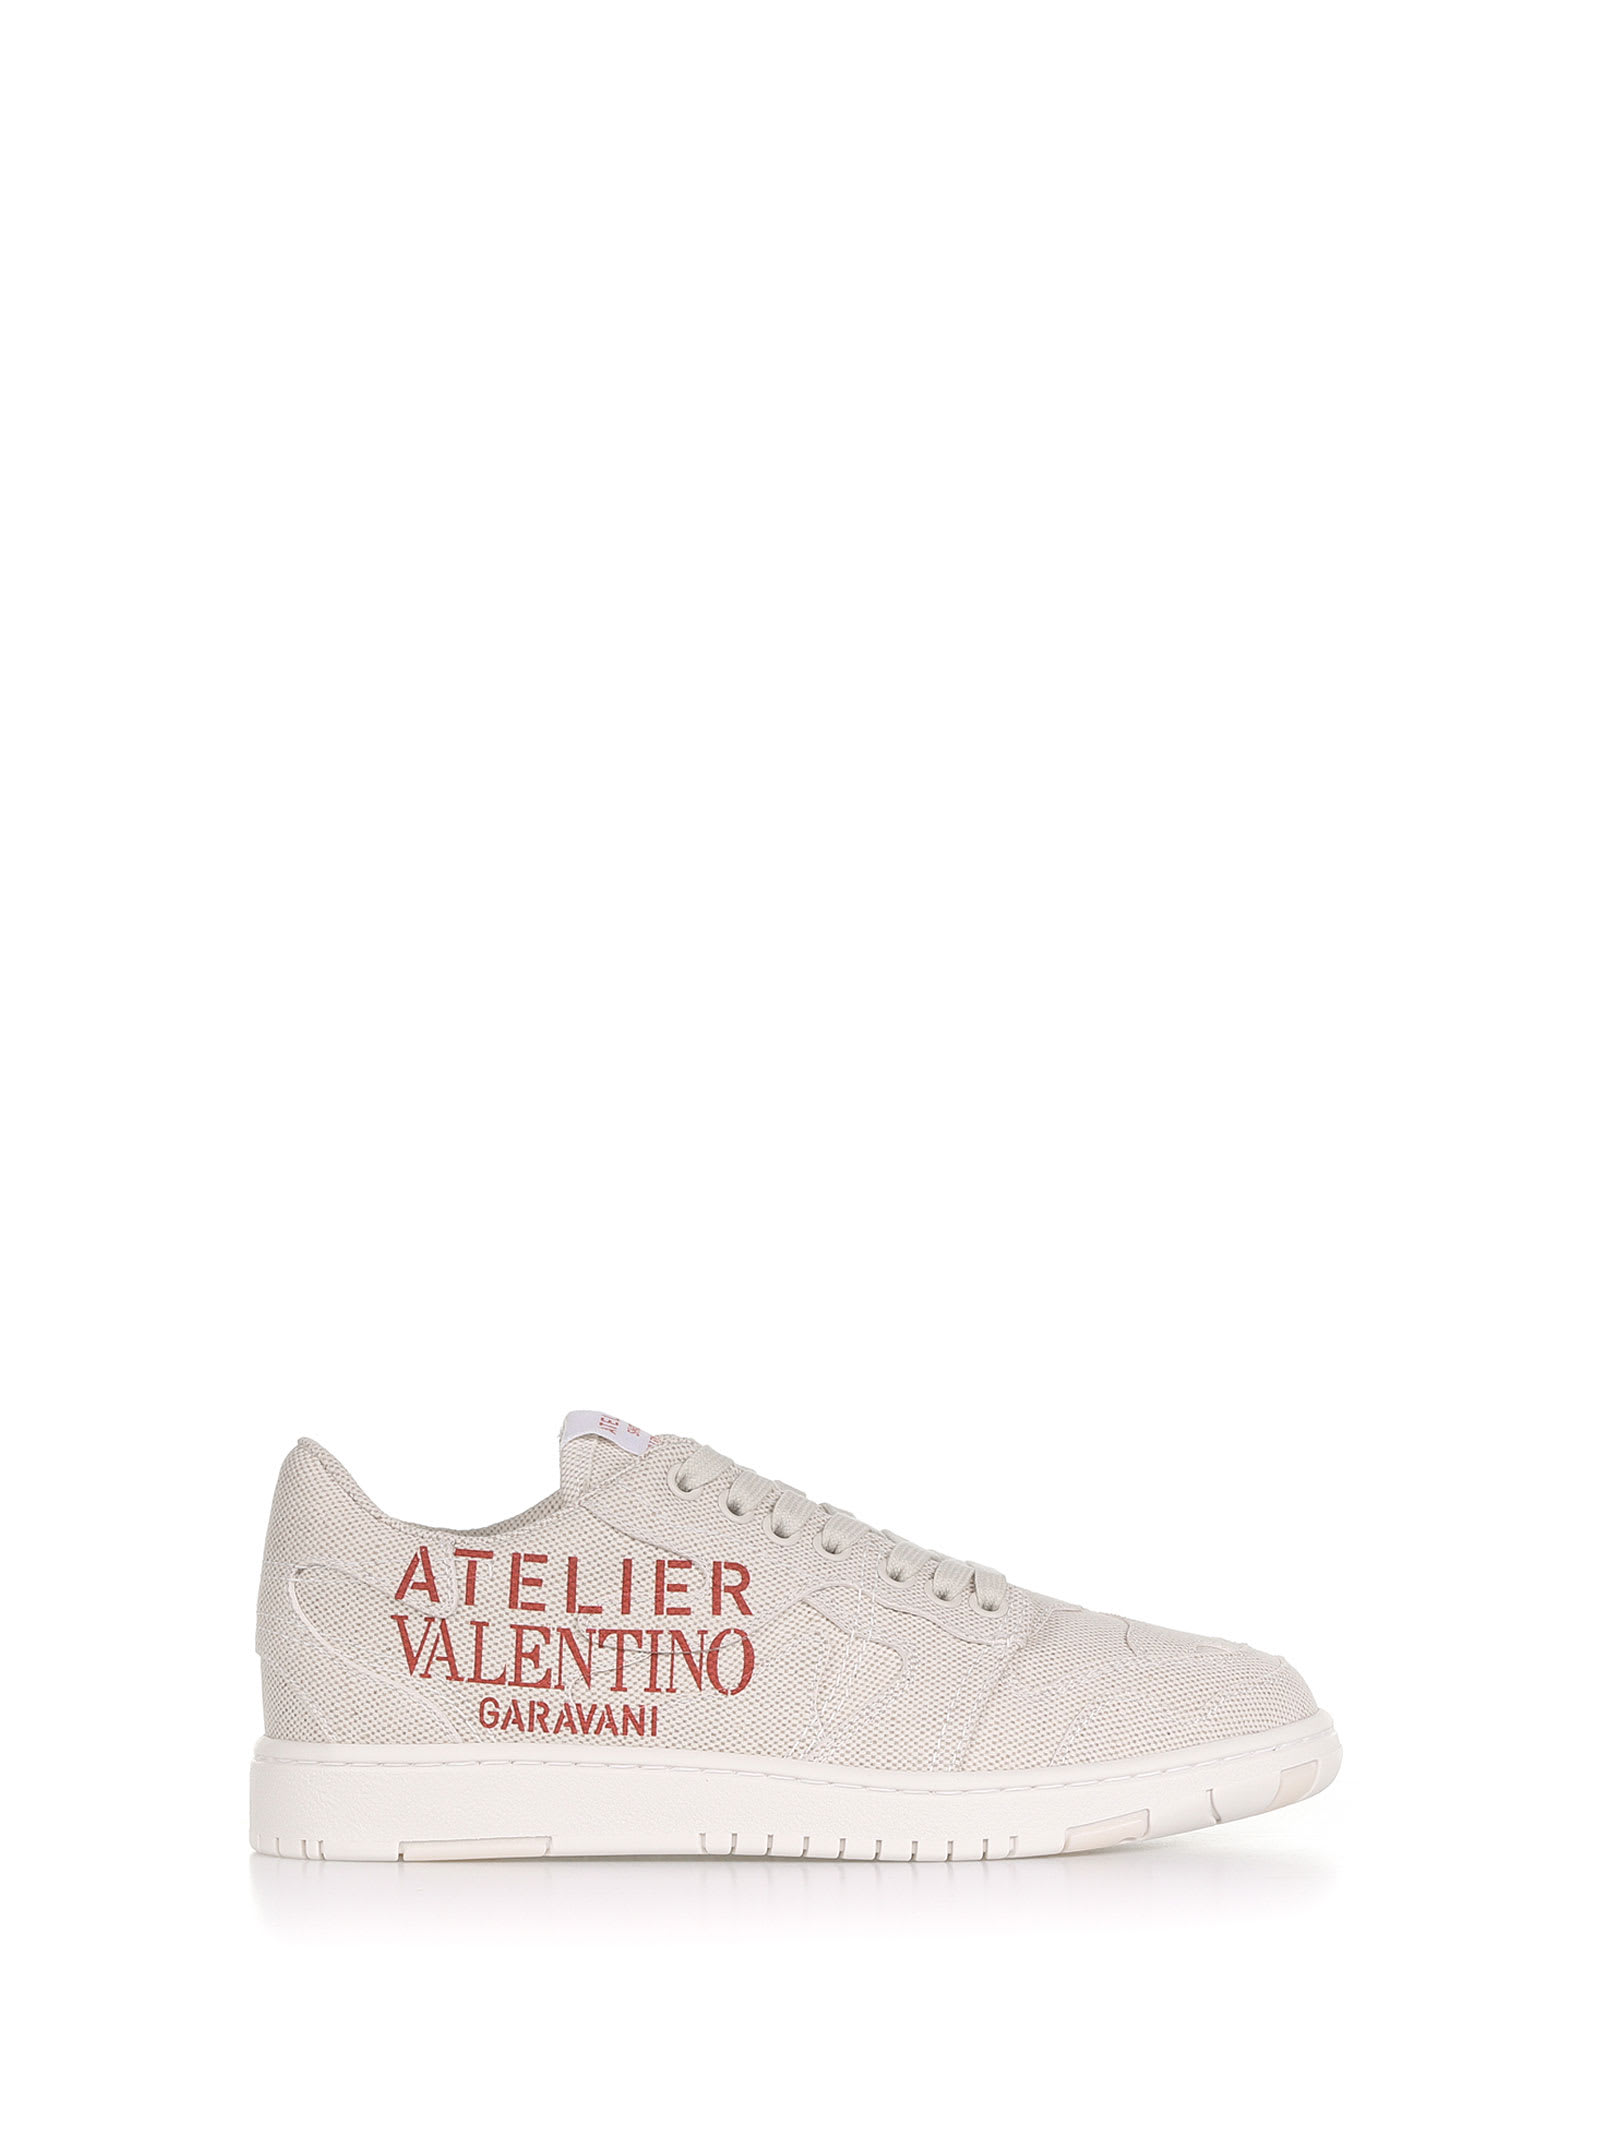 Valentino Atelier Camouflage Edition Sneakers